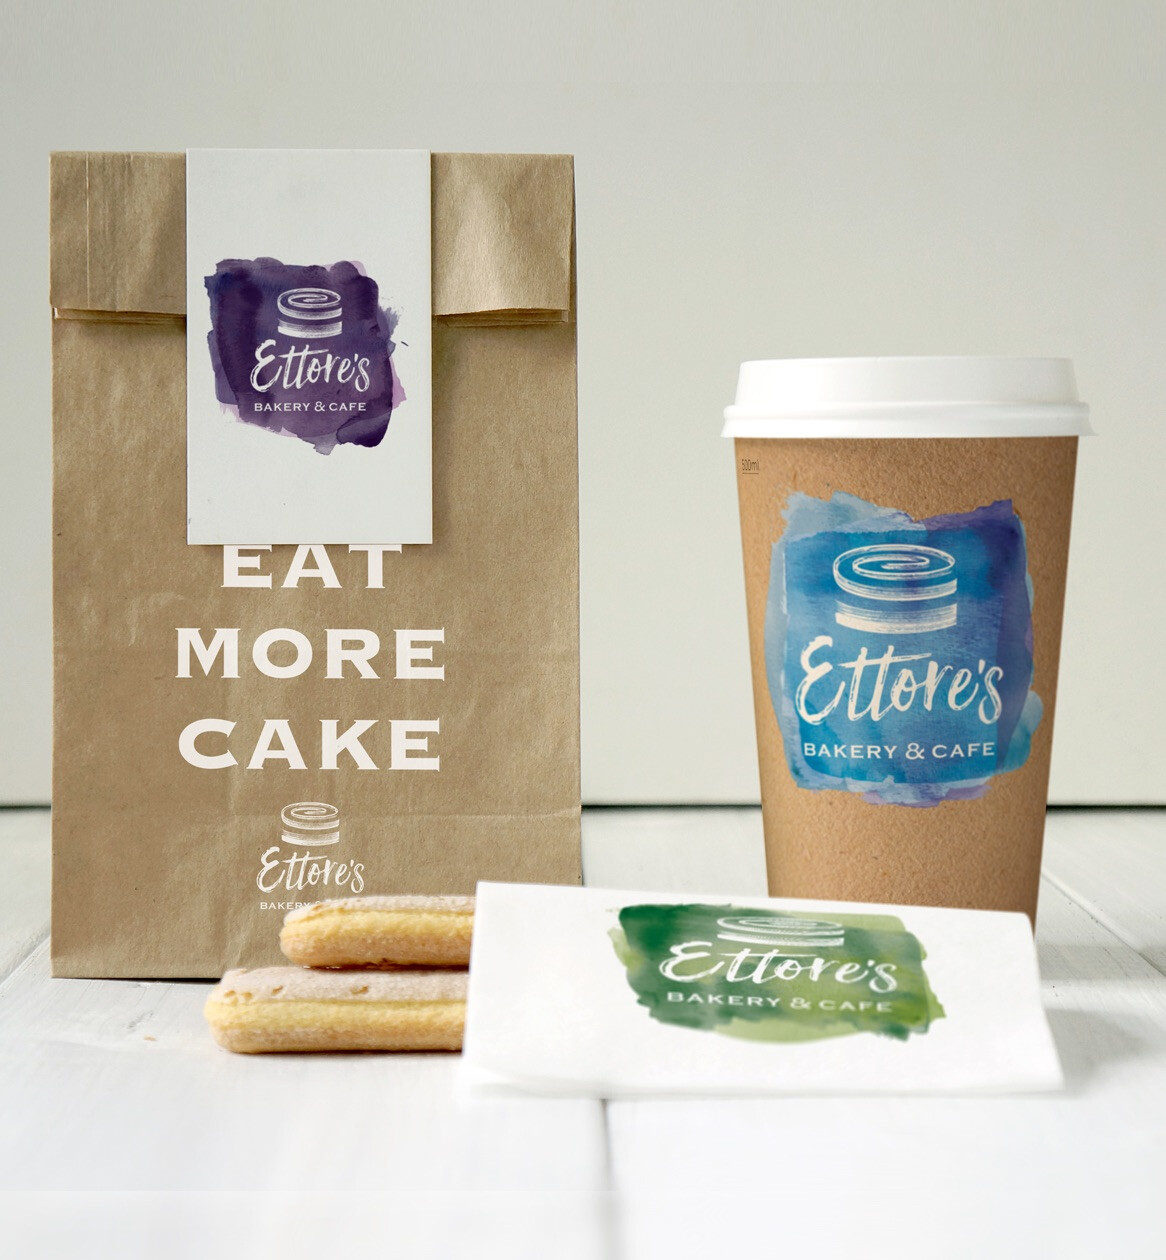 Brand concept imagery featuring the new logo on a takeaway bag, a coffee cup, and a food wrapper.